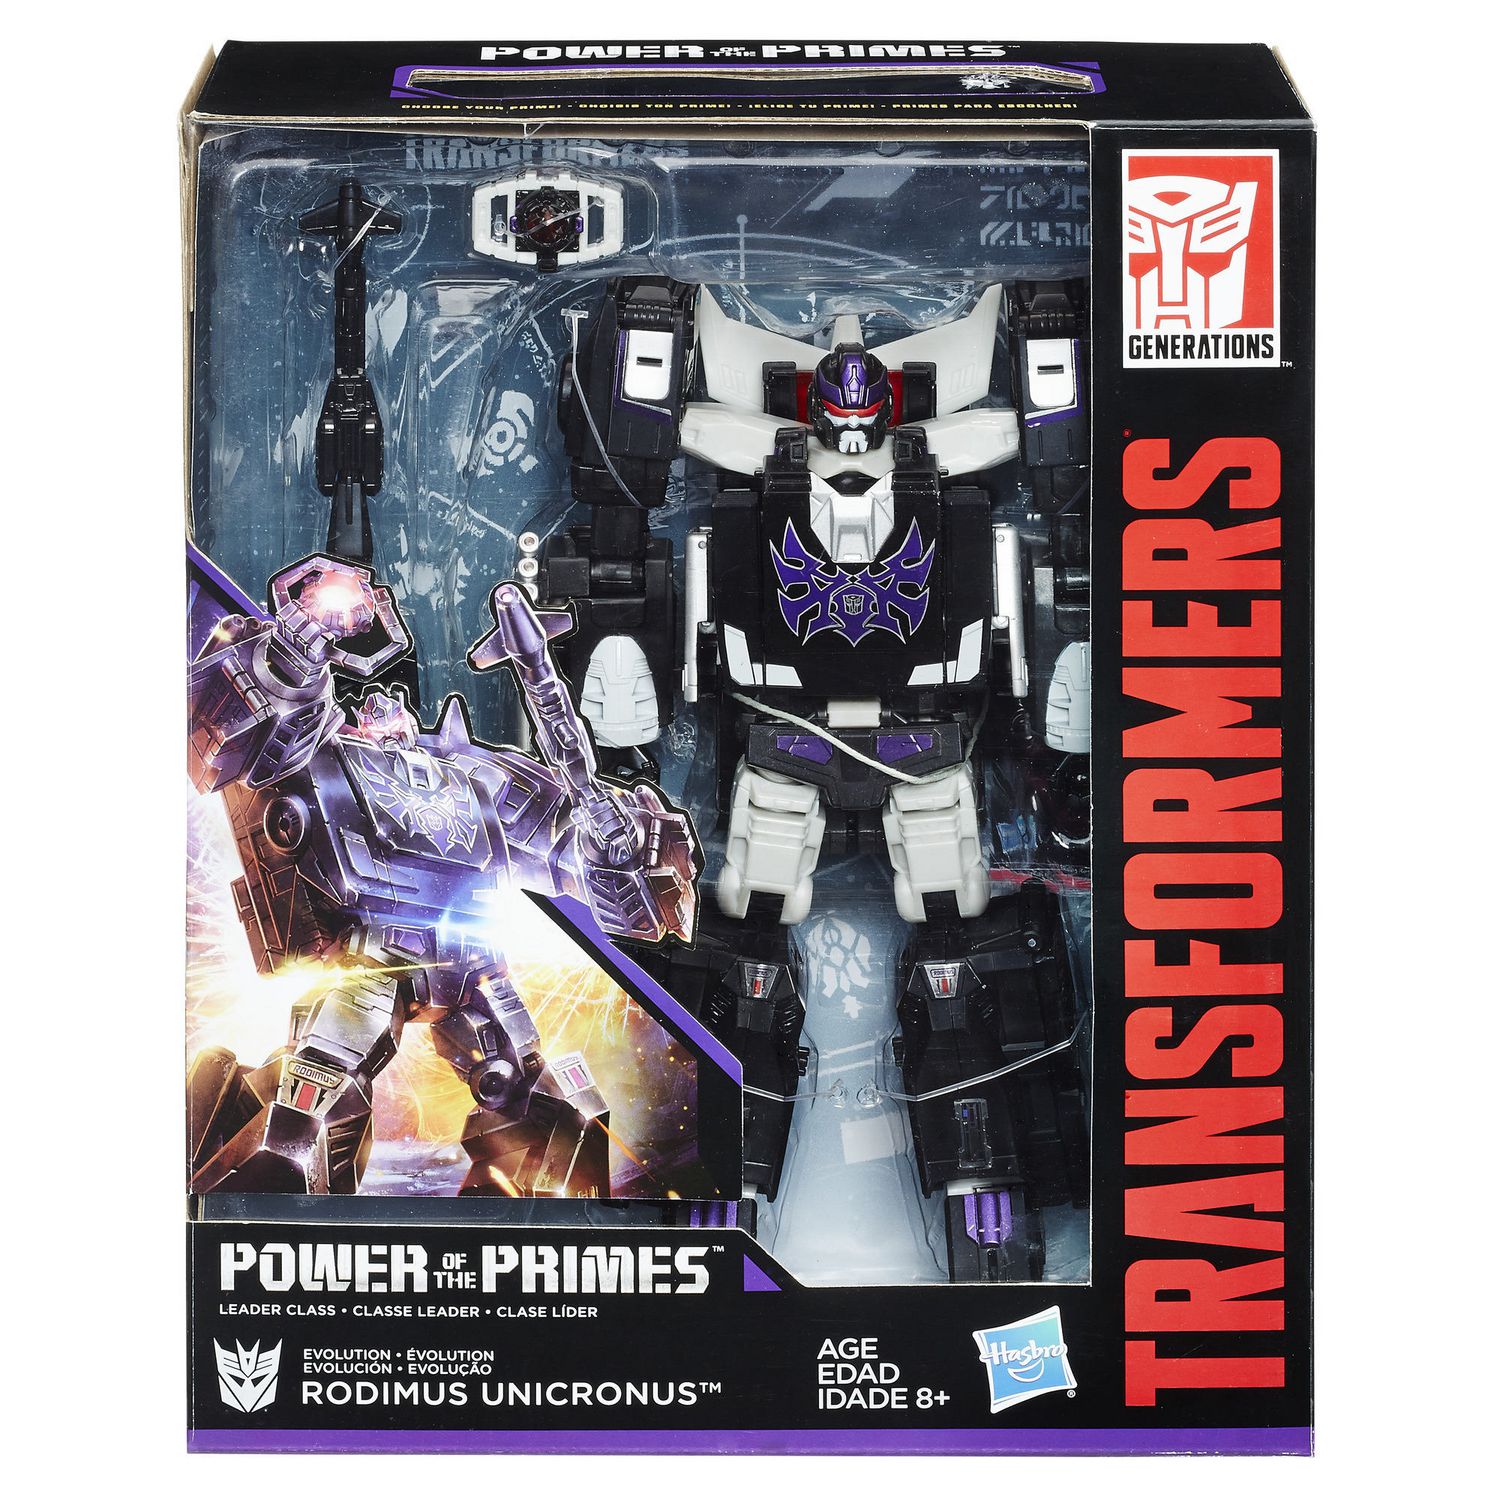 Transformers: Generations Power of the Primes Leader Evolution